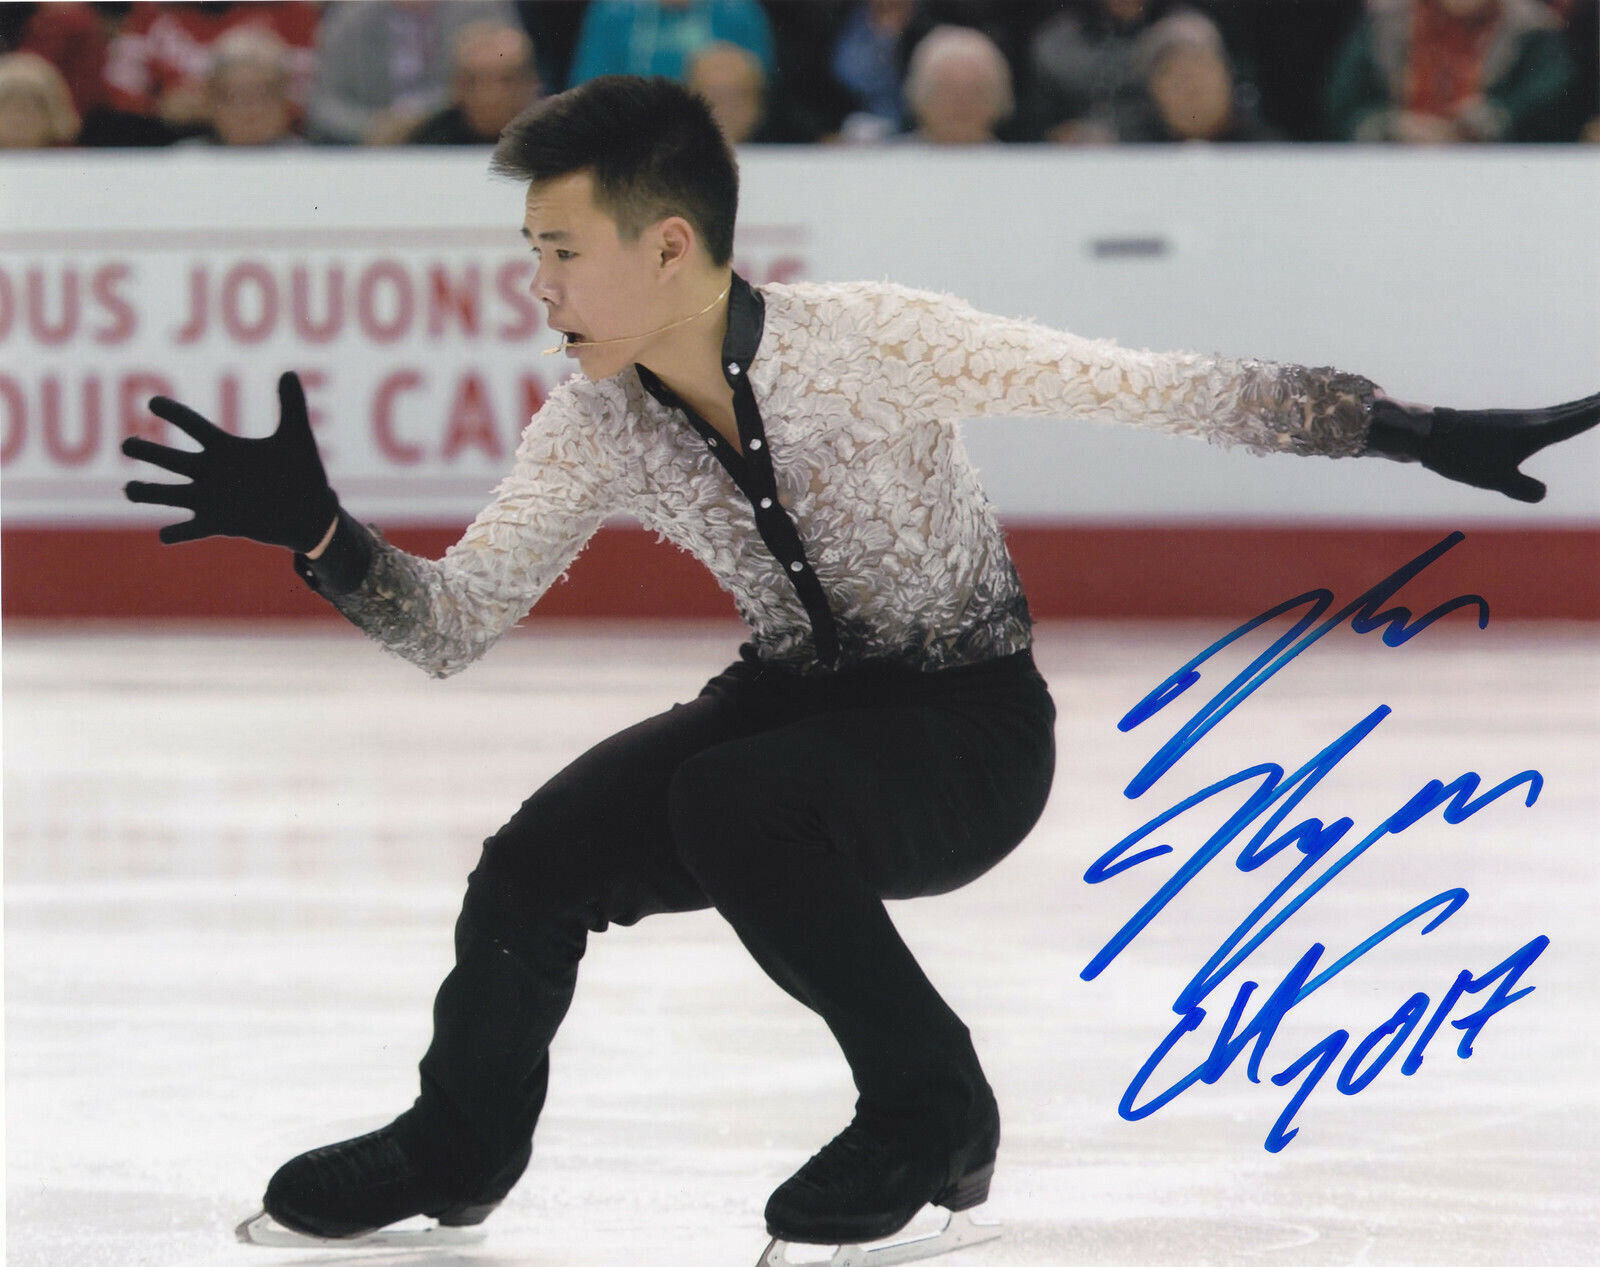 NAM NYGUEN SIGNED AUTOGRAPHED FIGURE SKATING 8X10 Photo Poster painting EXACT PROOF #3